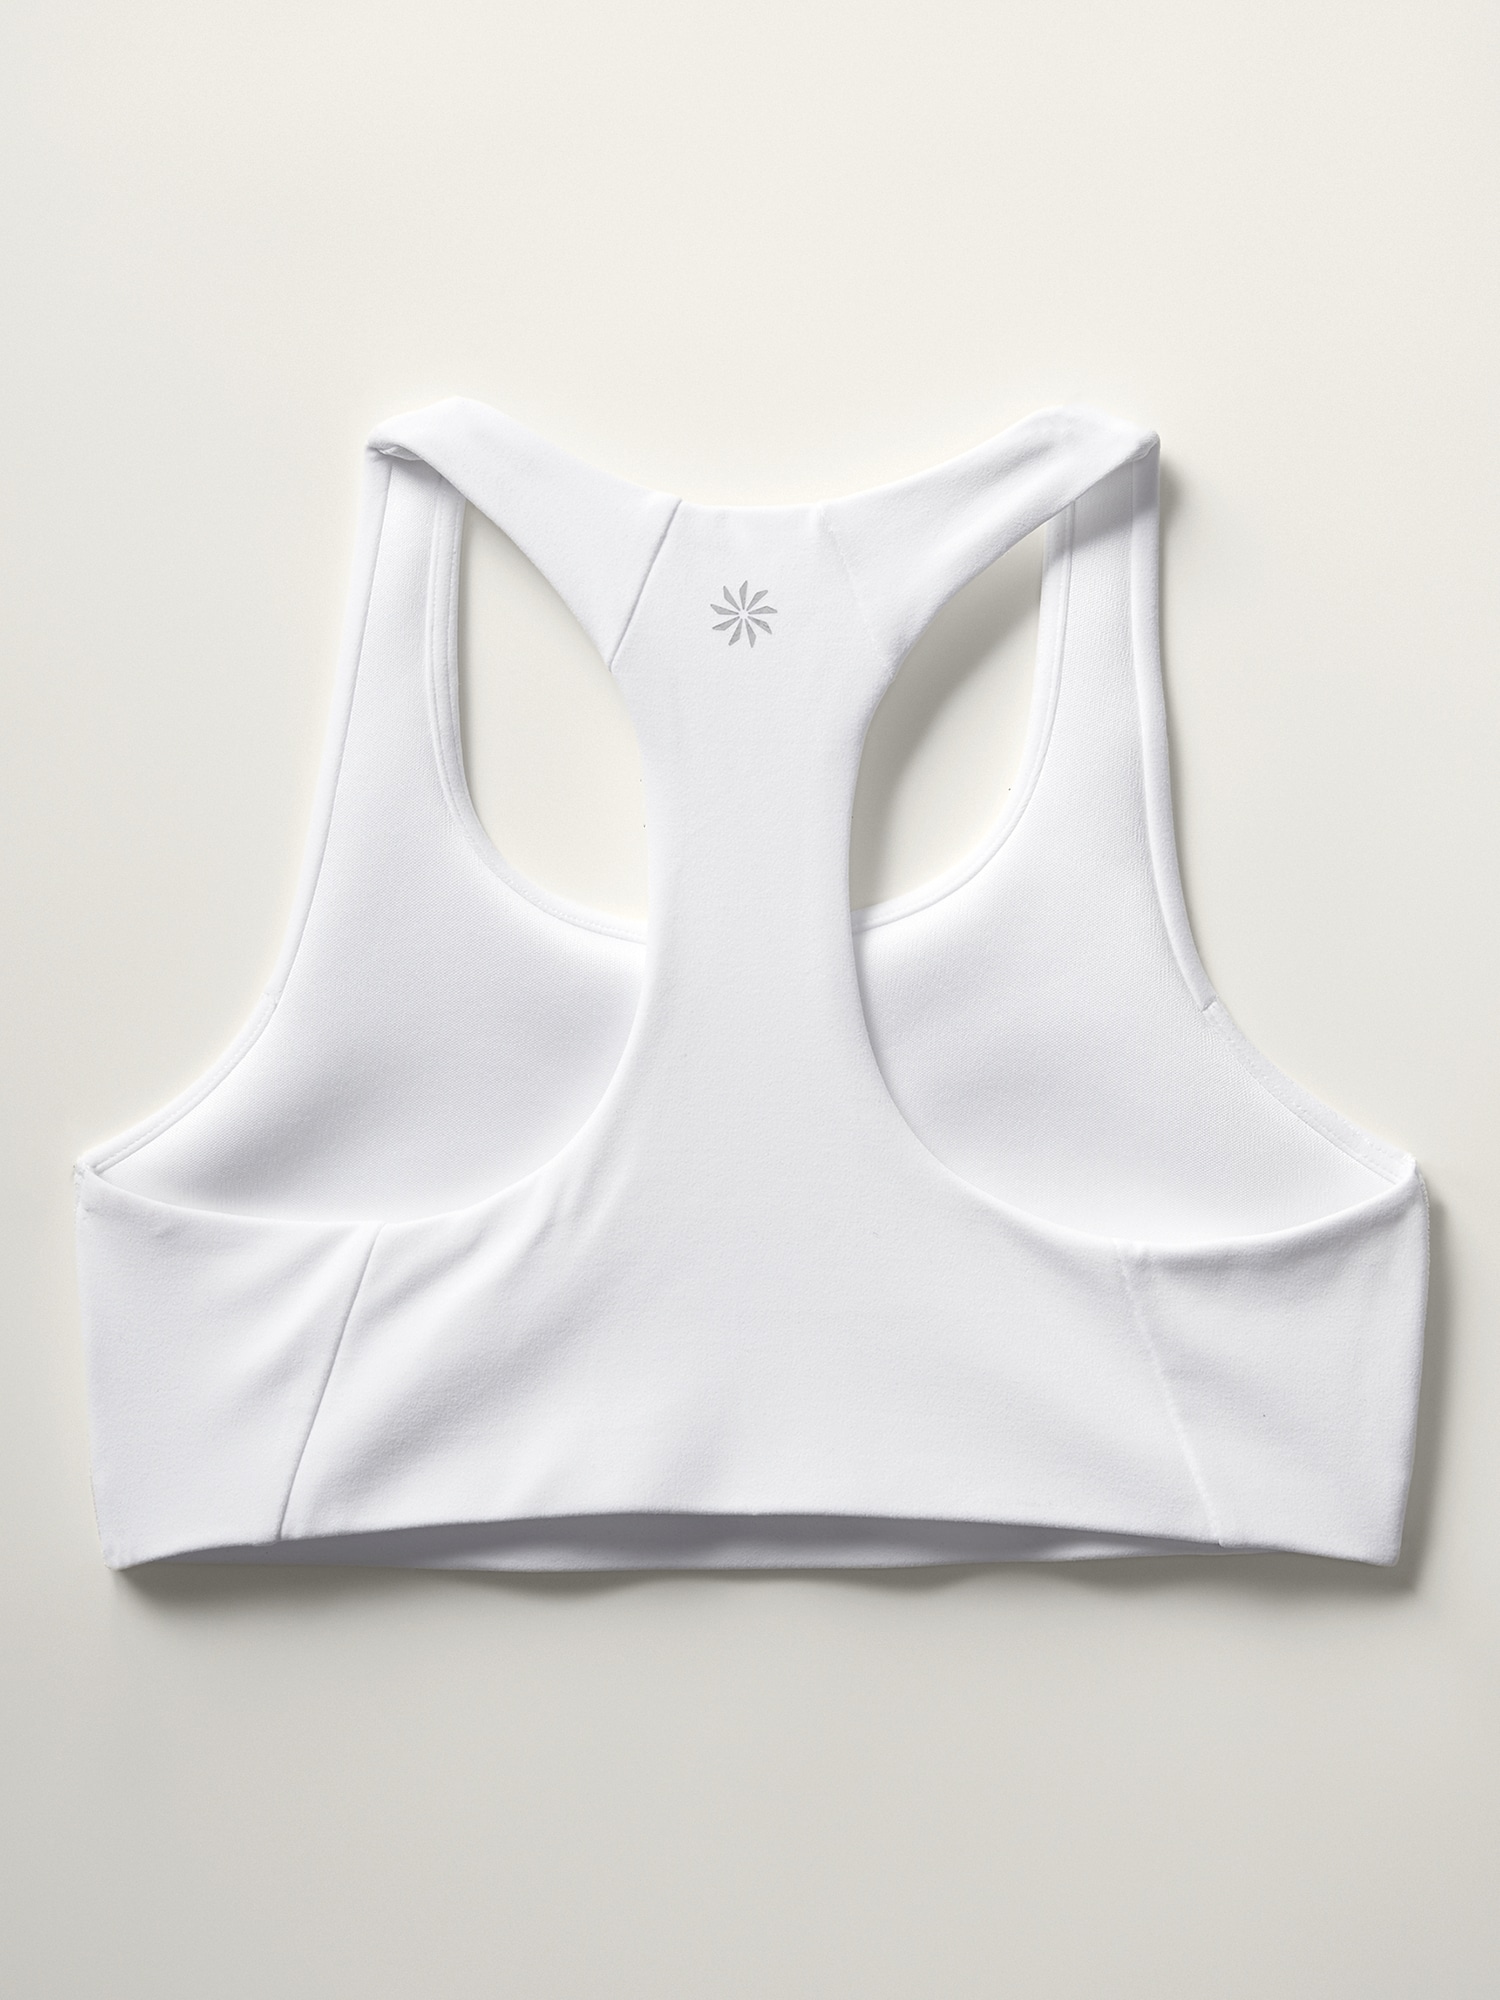 Womens Sweetheart Racerback Sports Bra - Tops, Theatricals TH5144